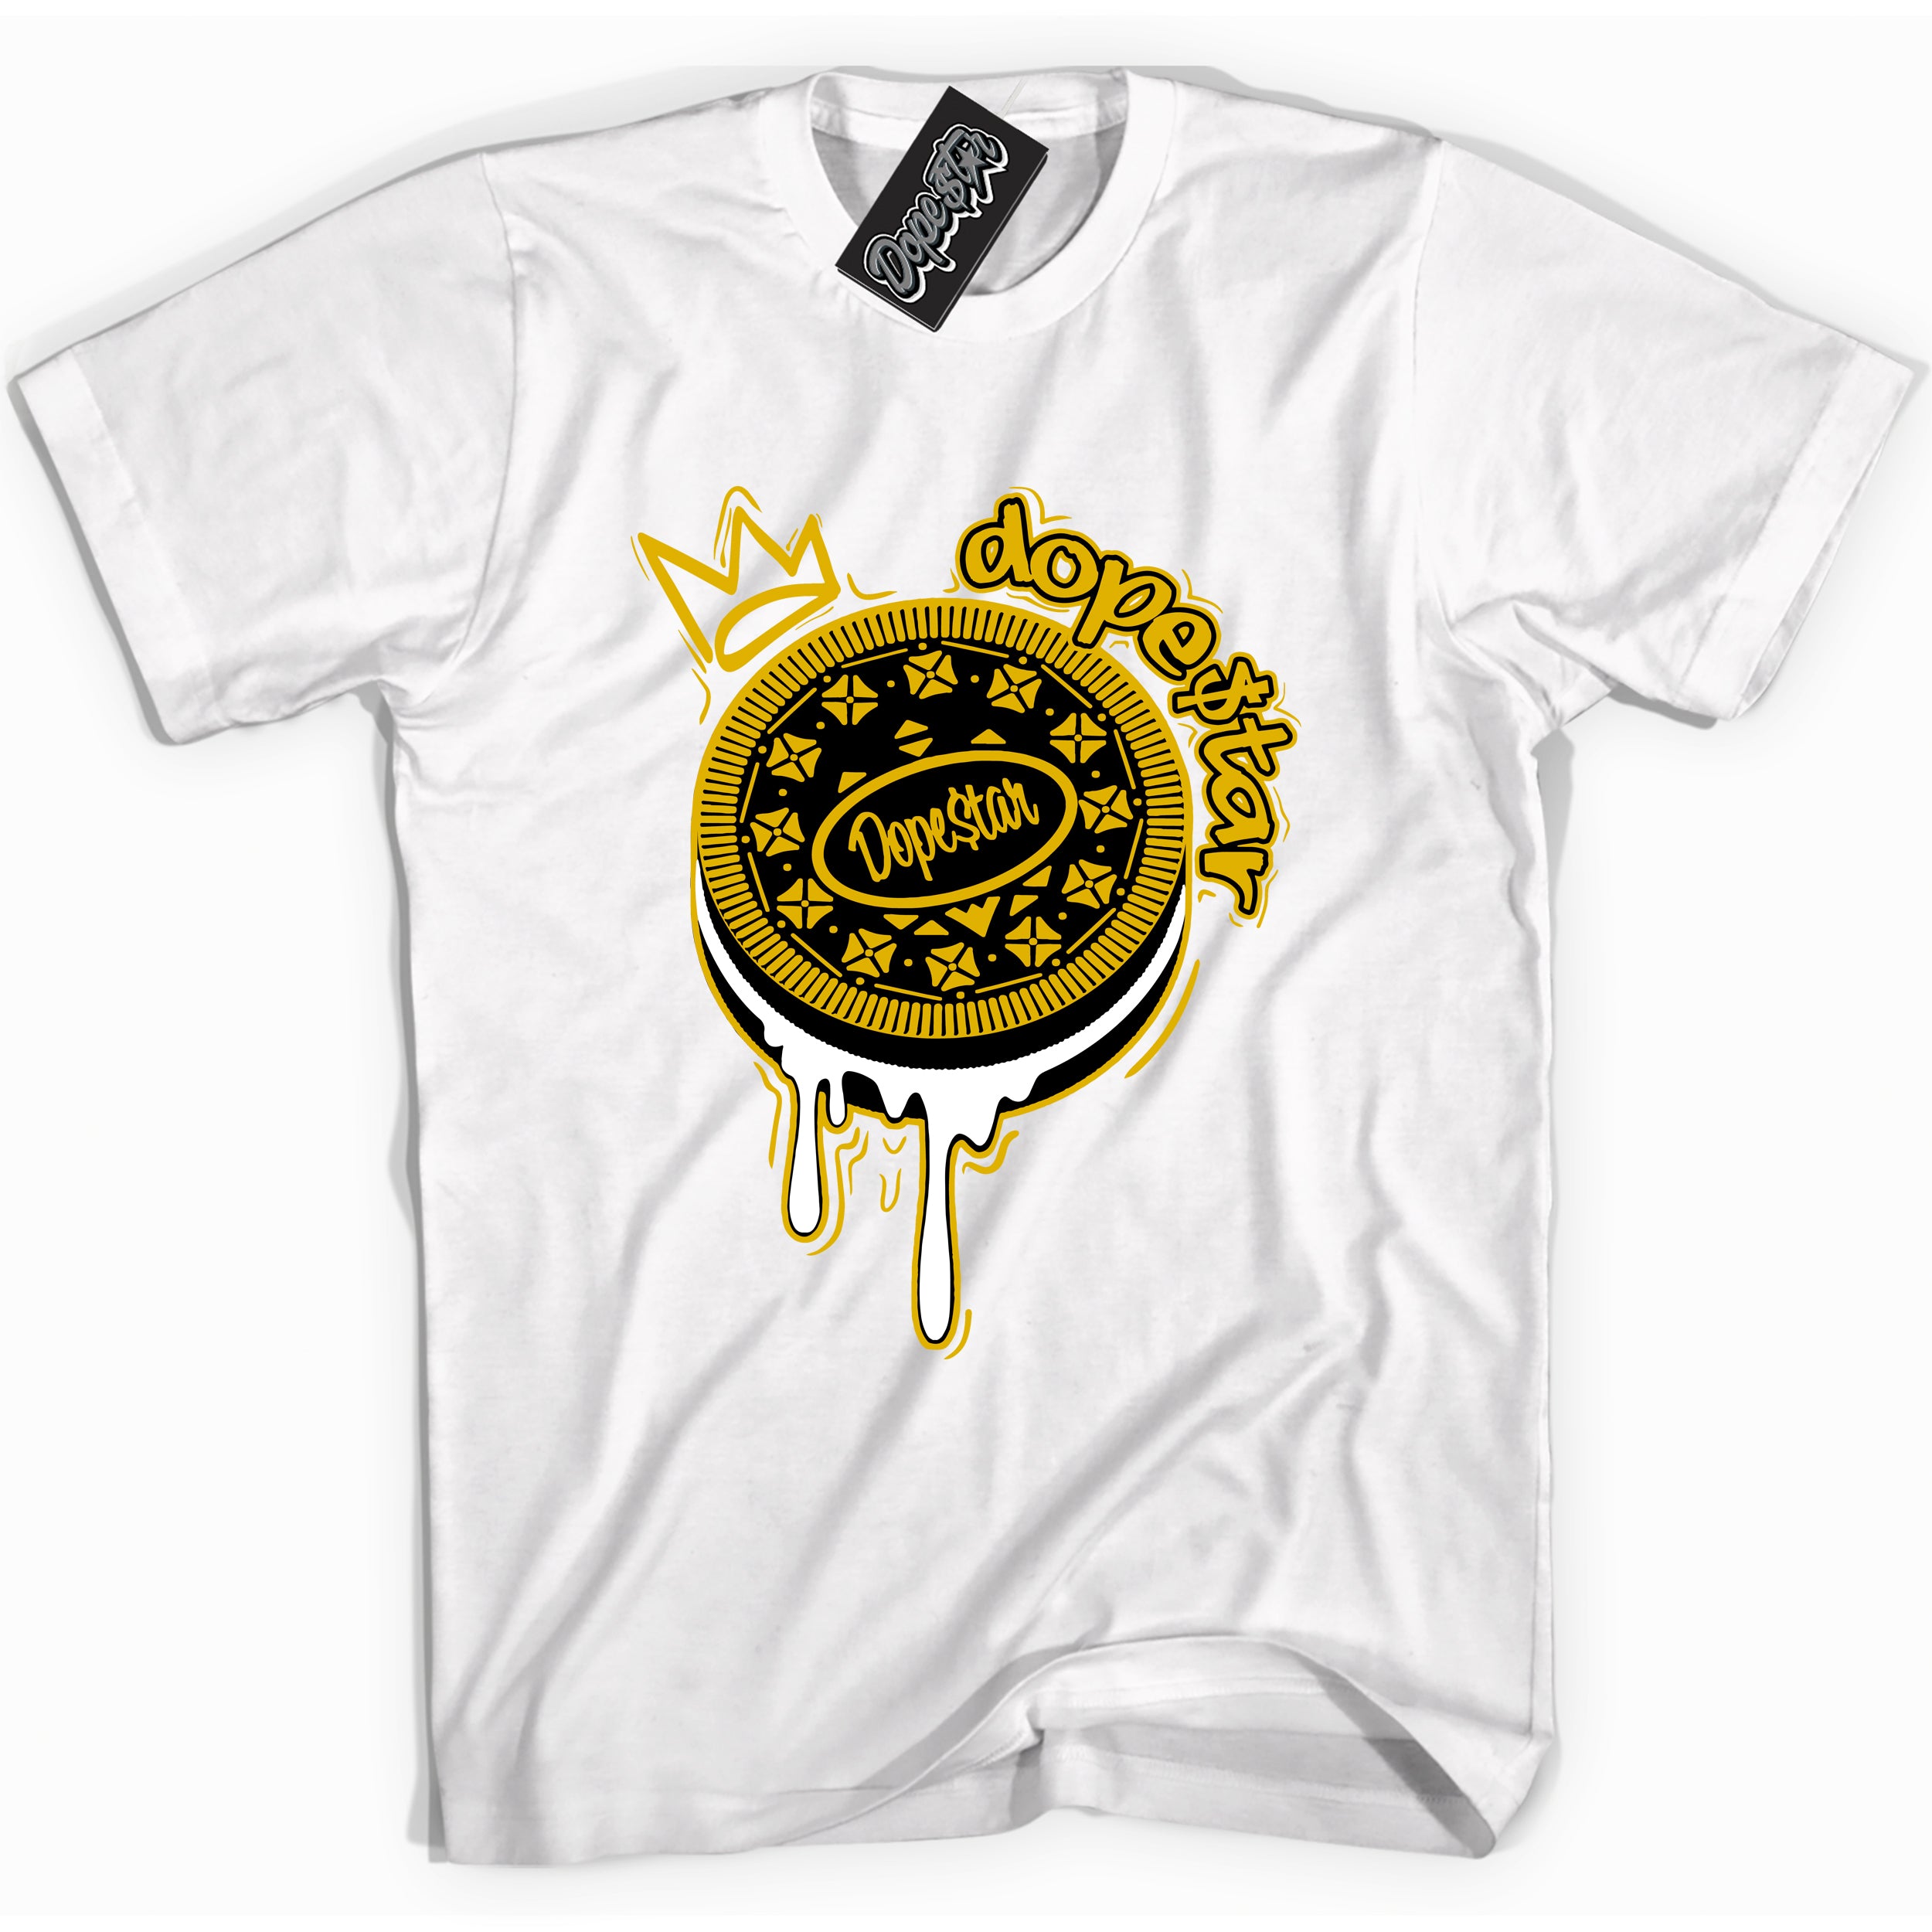 Cool White Shirt with “ Oreo DS” design that perfectly matches Yellow Ochre 6s Sneakers.